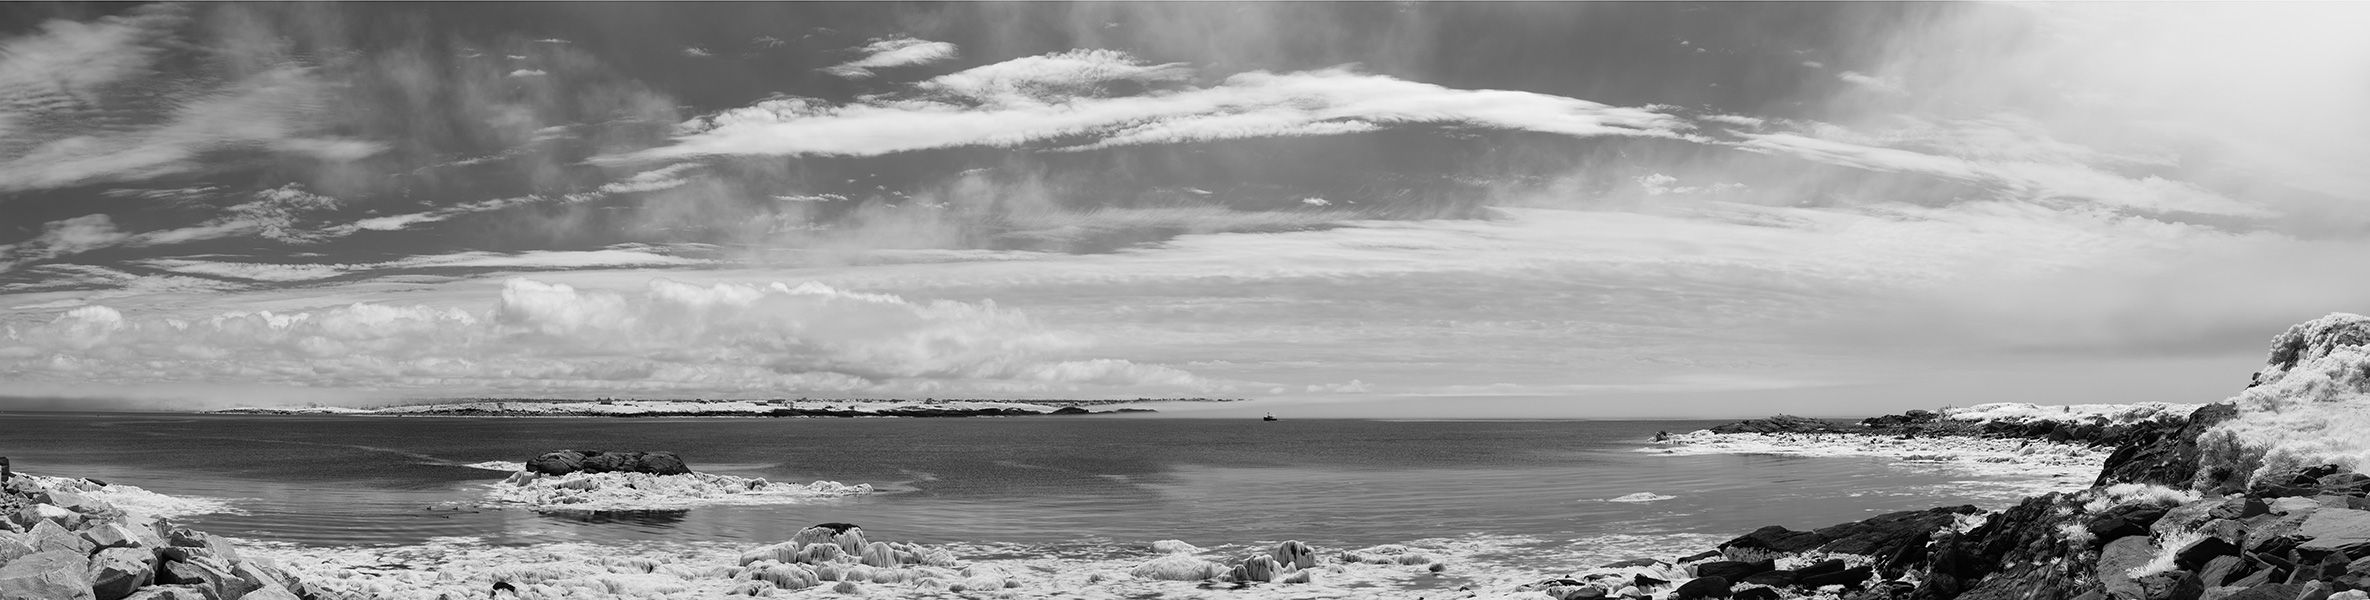 Infrared Panoramic Photo of Narrow Harbor Channel.